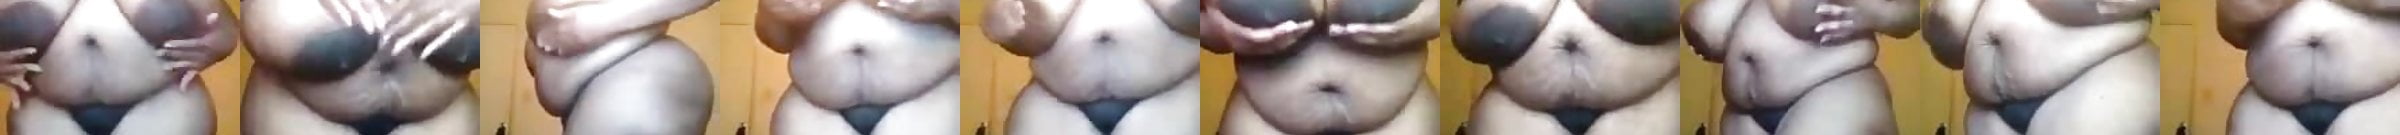 Huge South Africa Honey Bbw Boobs And Hairy 2 Free Porn 37 Xhamster